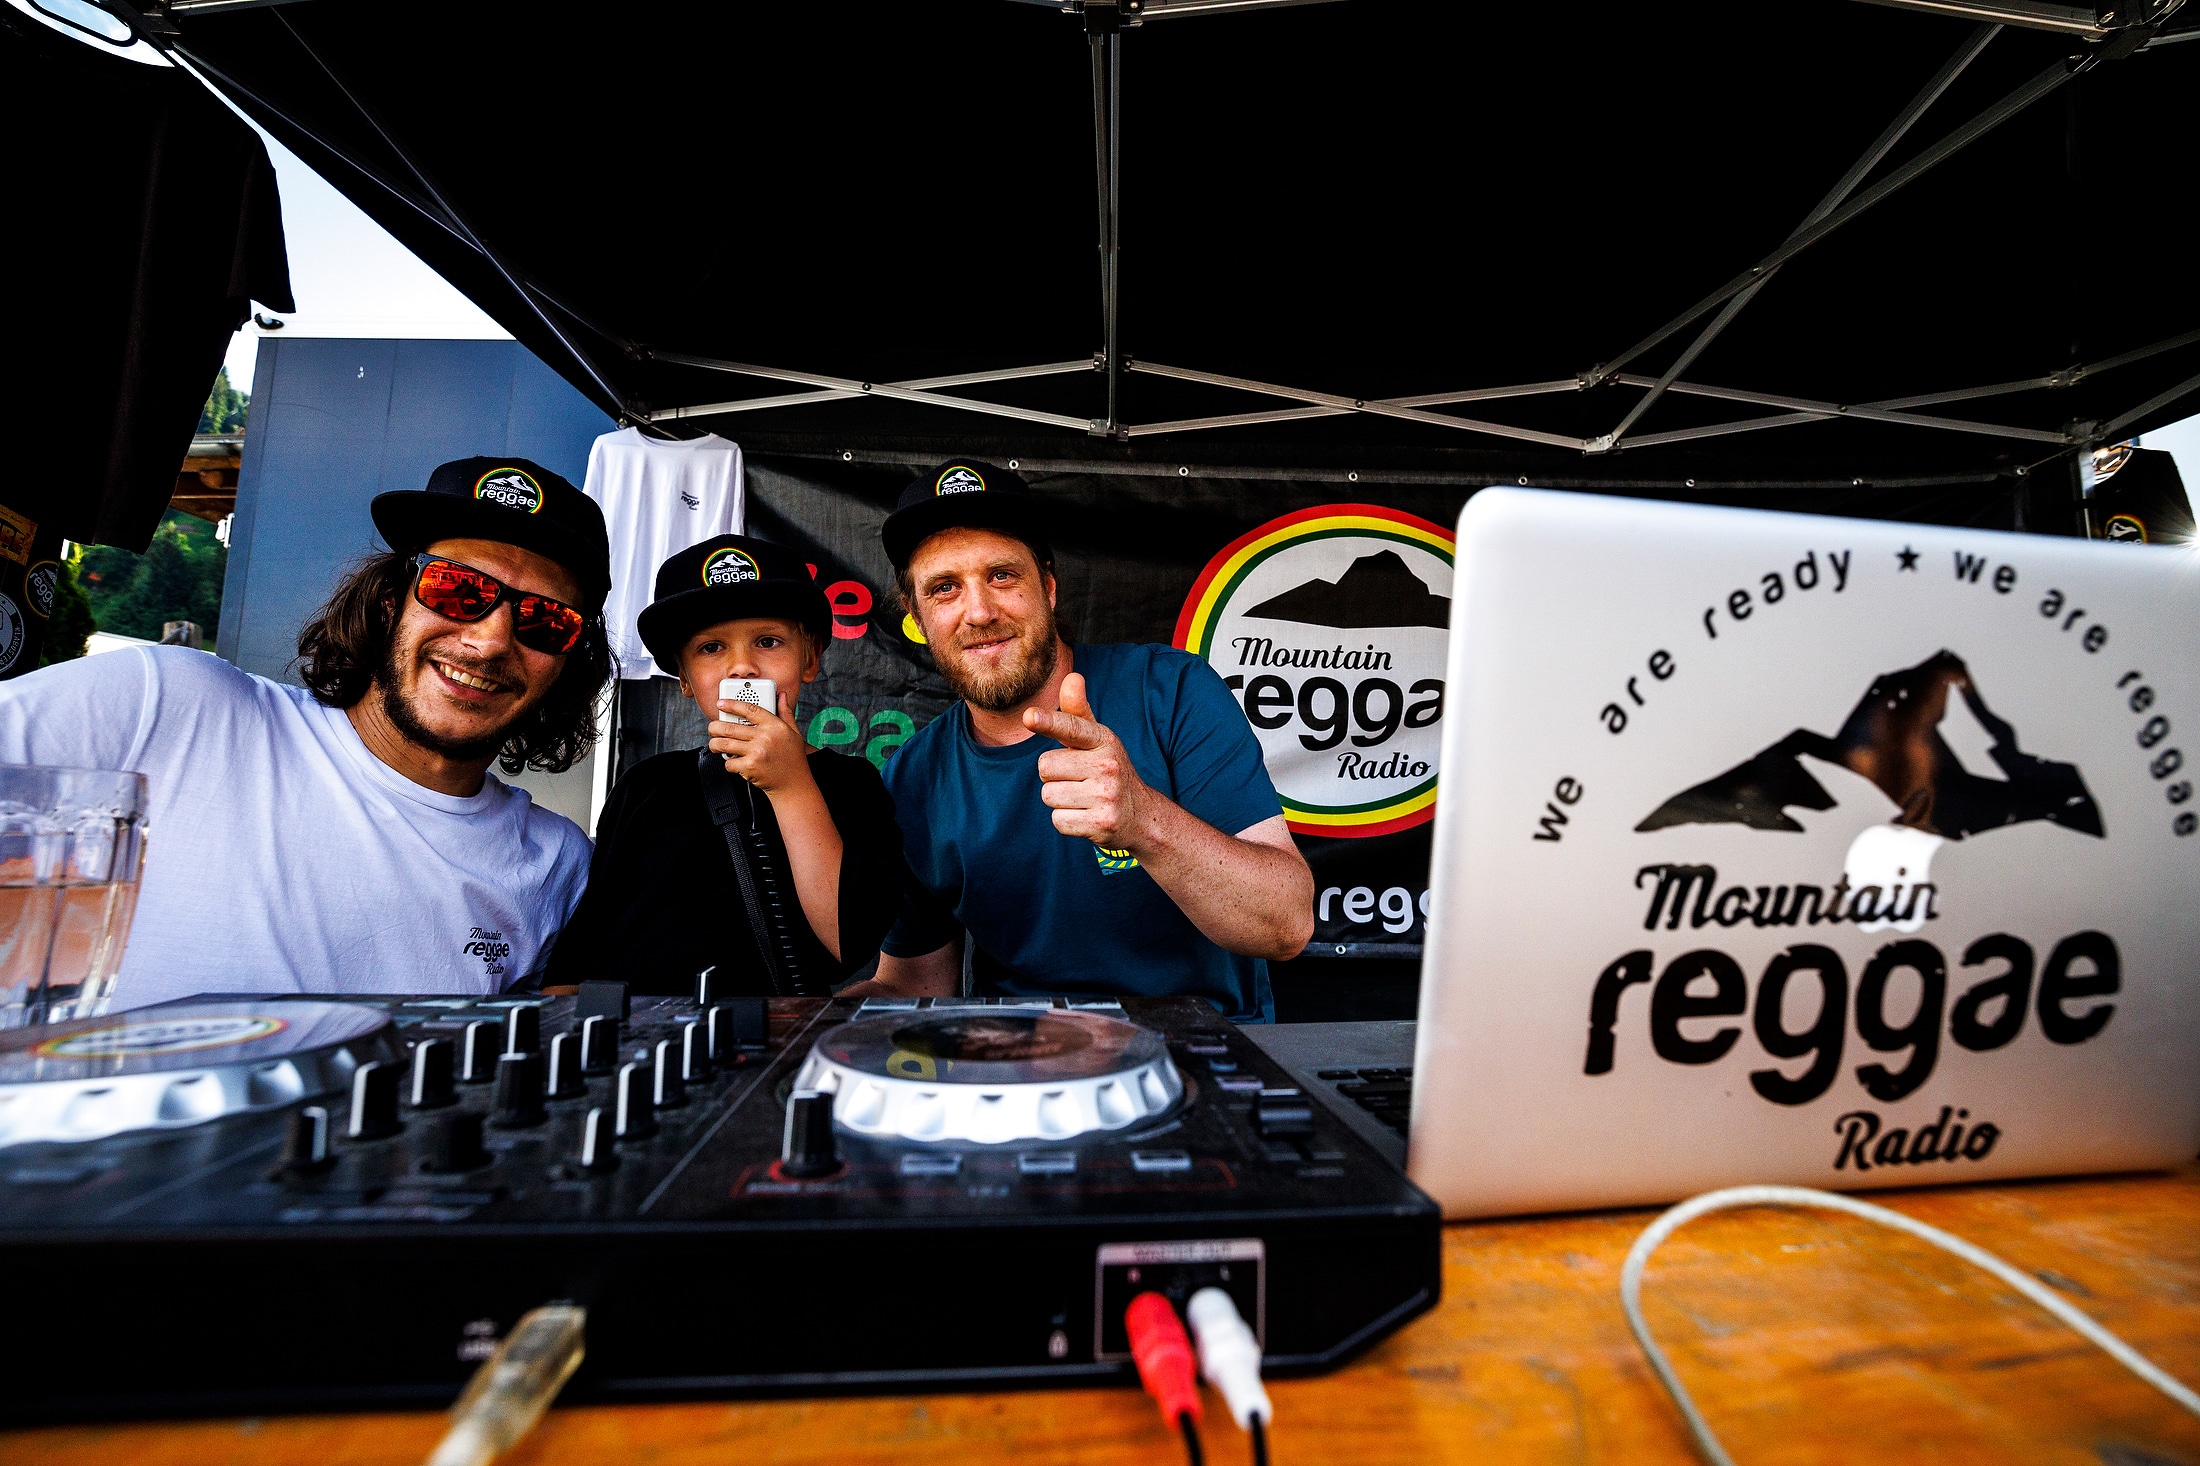 Leogang wouldn't be the same without the Mountain Reggae crew. Thanks for the good times and vibes.  PHOTO: SVEN